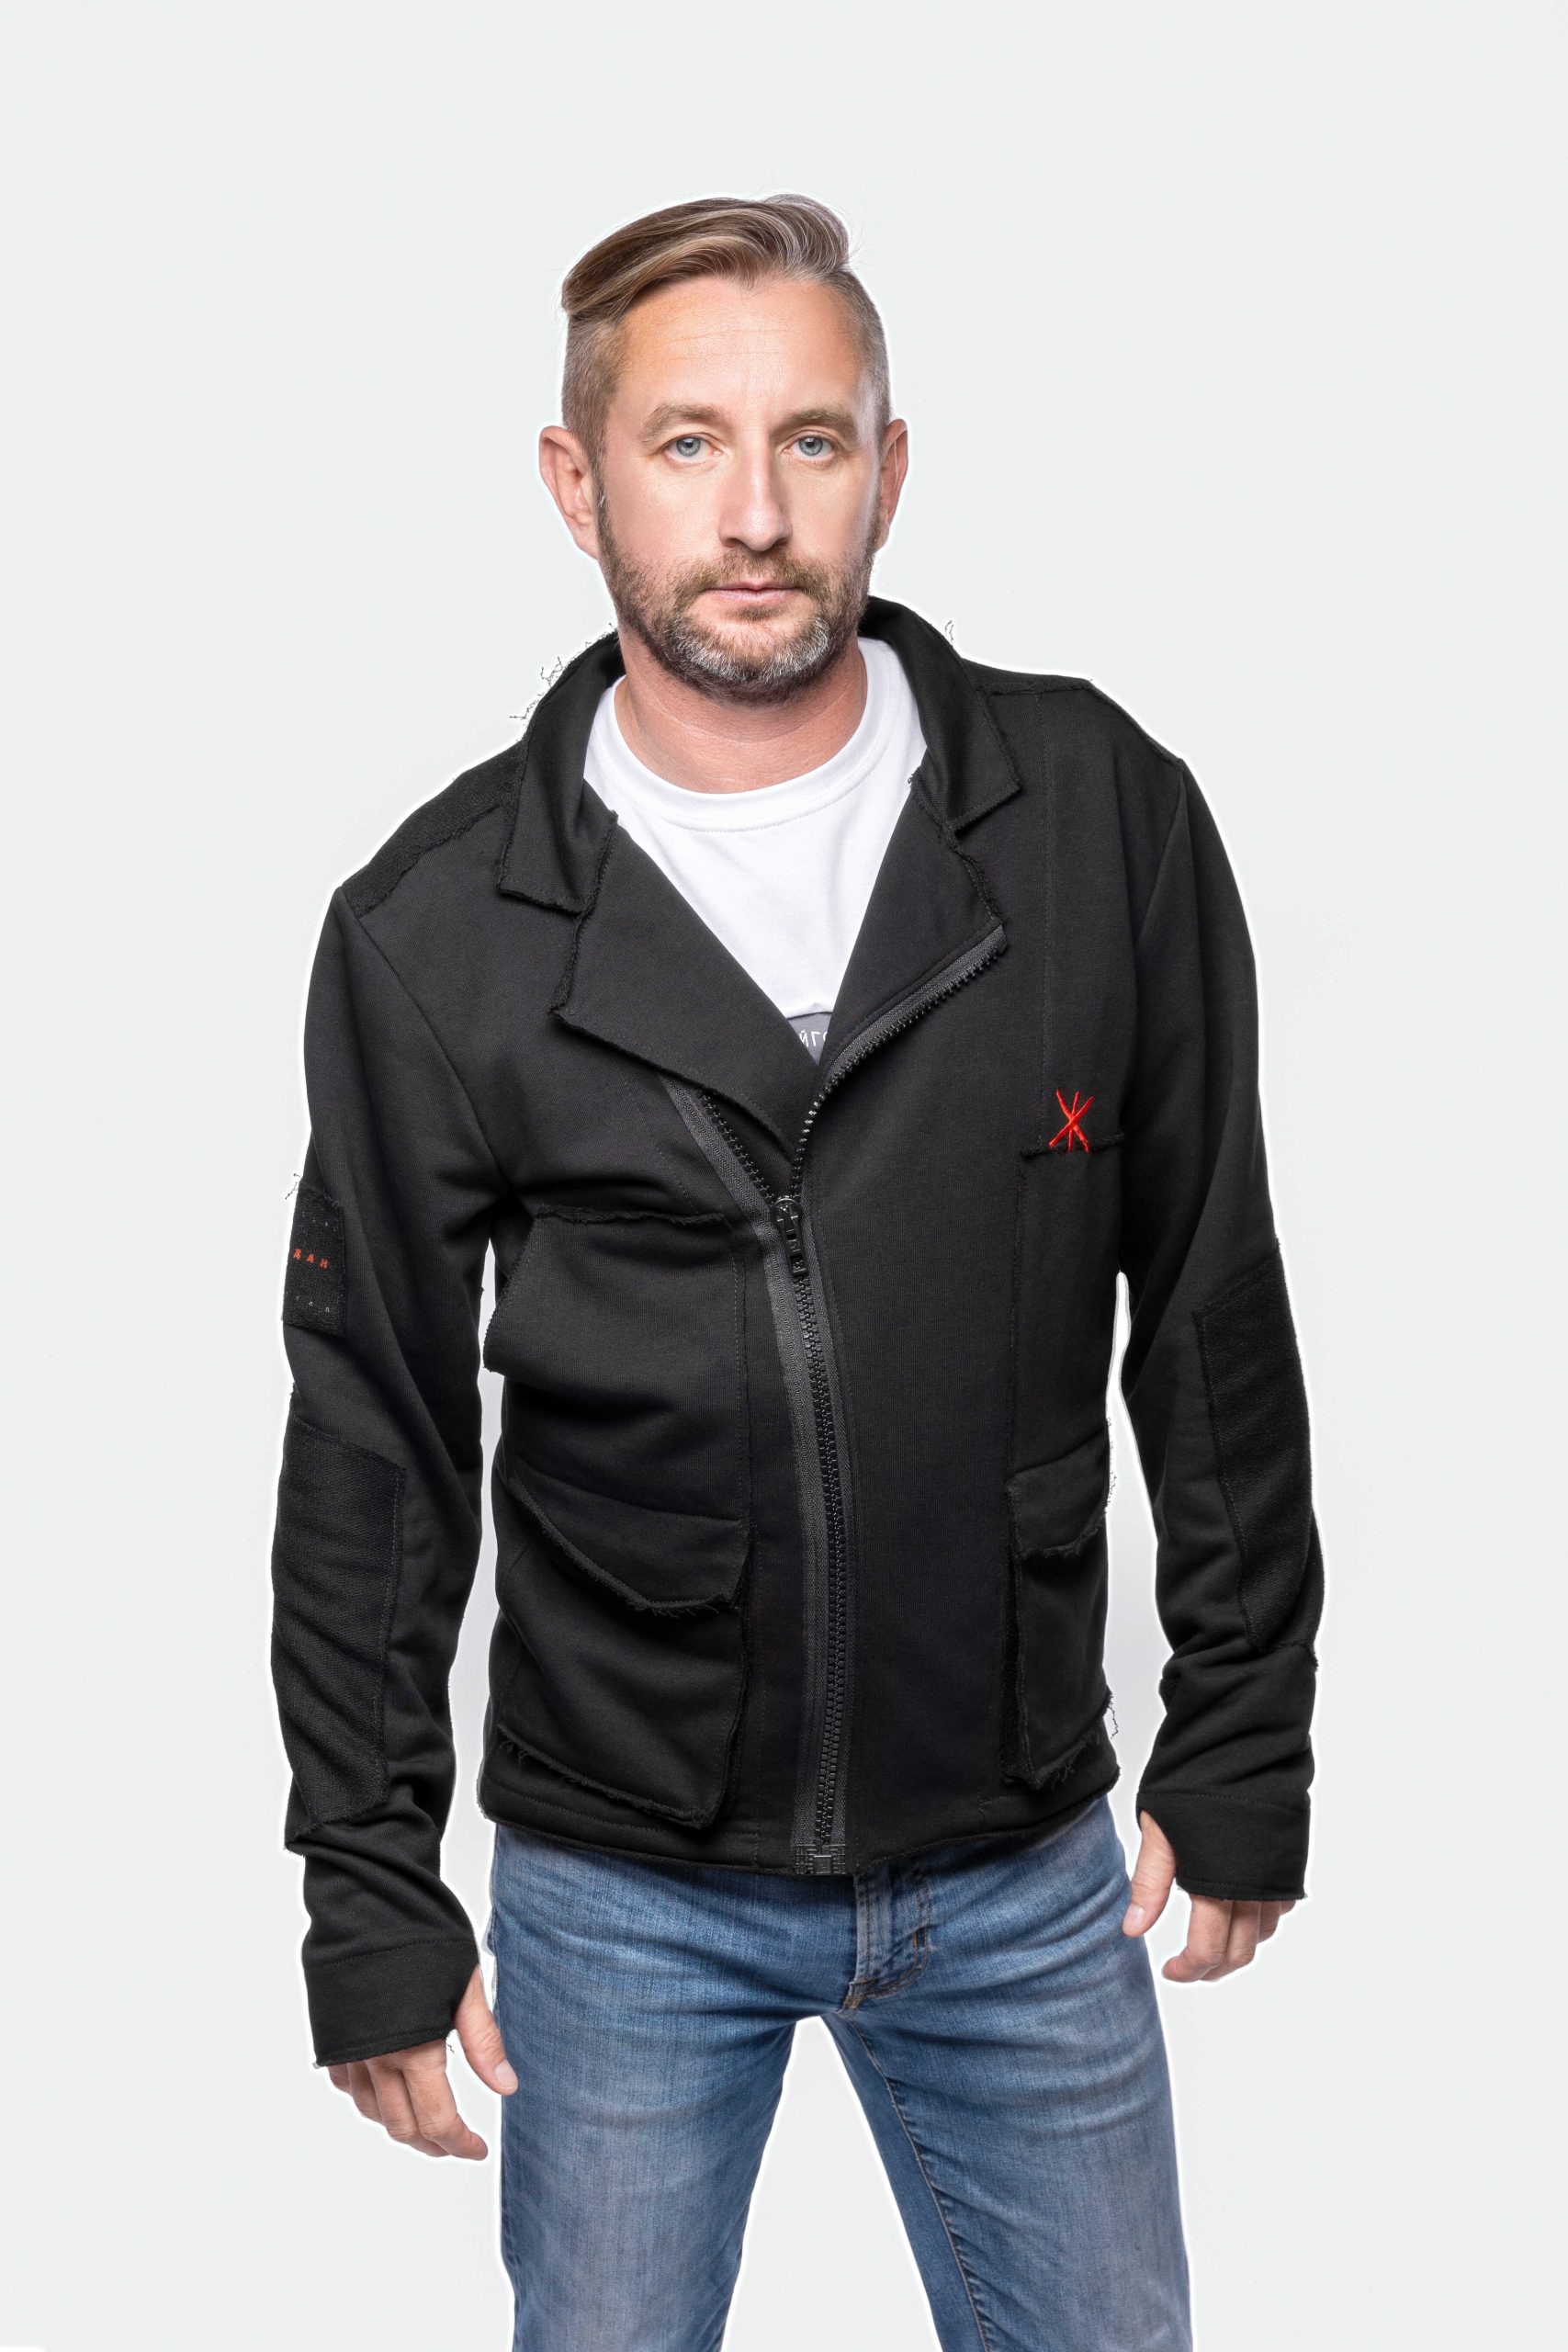 Men's Cardigan What You Believe In. Color black. .